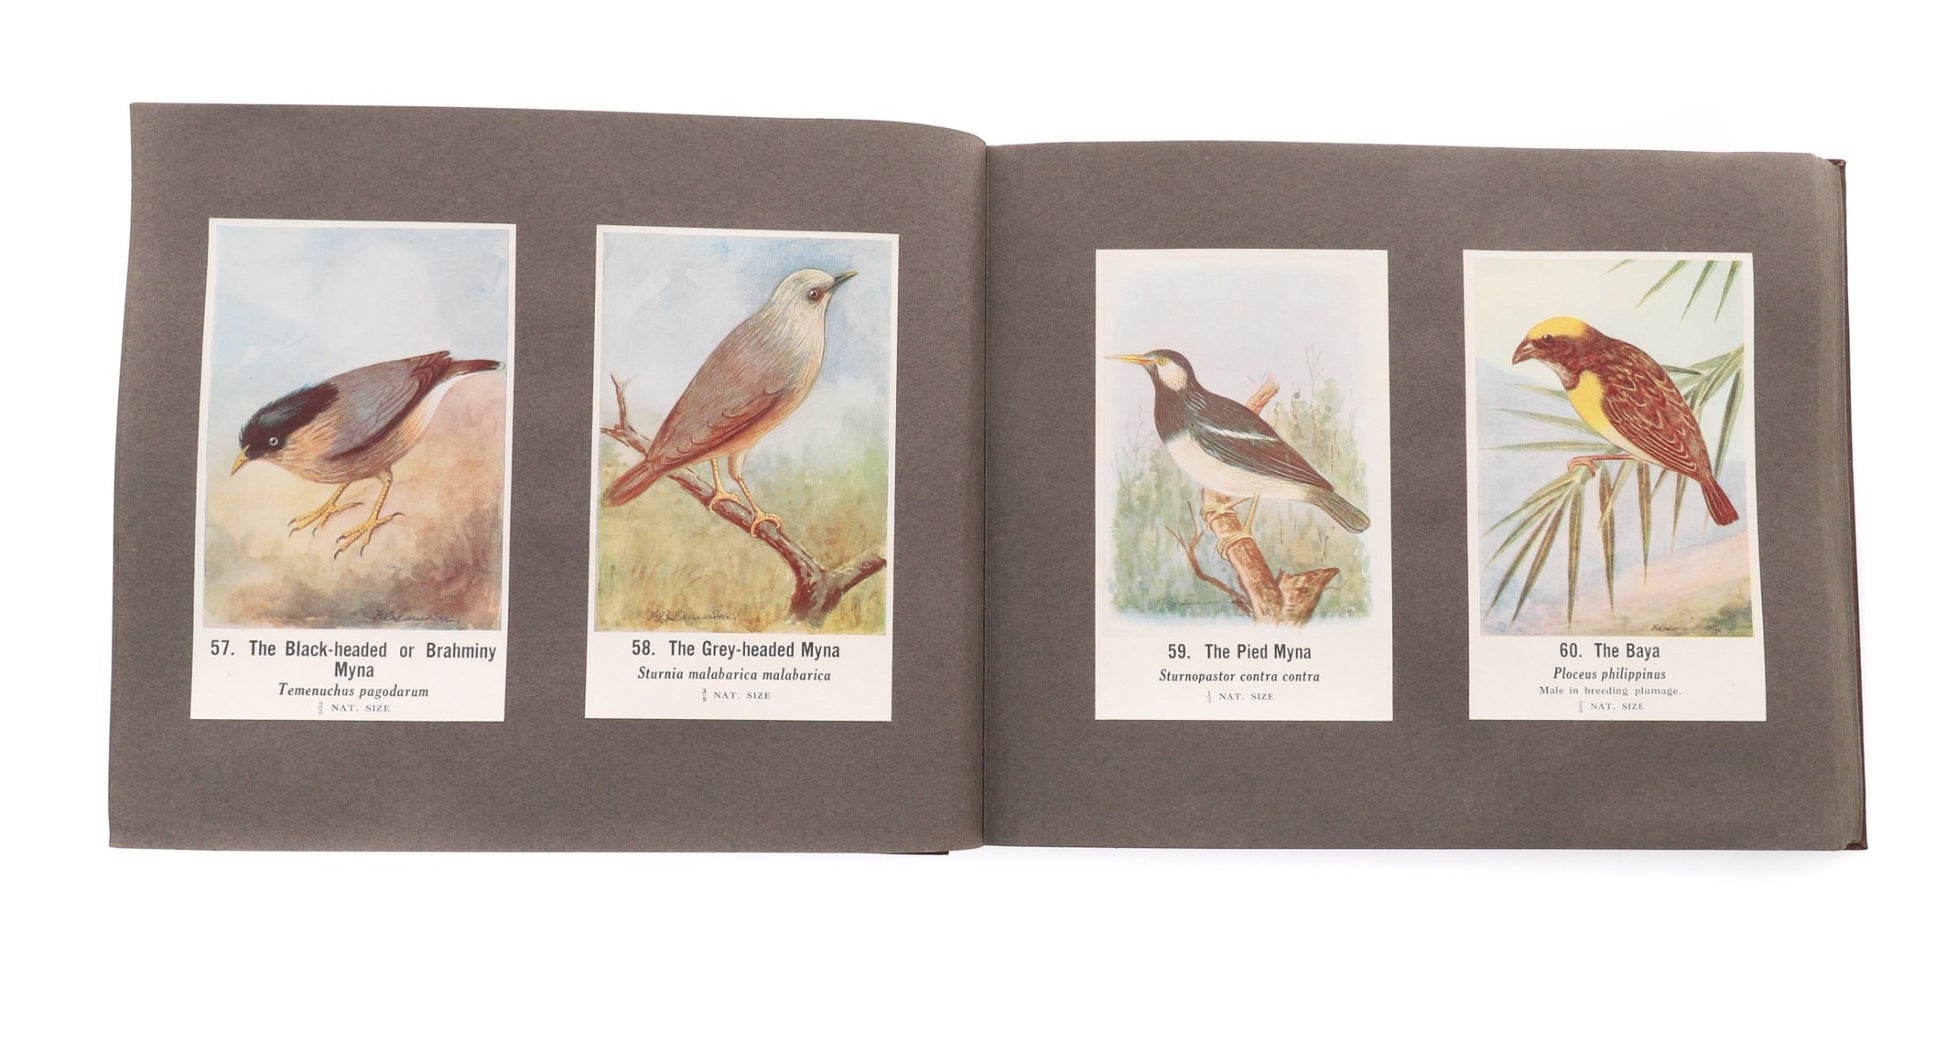 The Sind Natural History Society 1933 - Common Indian Birds - 196 Lithographs - Dahlströms Fine Art